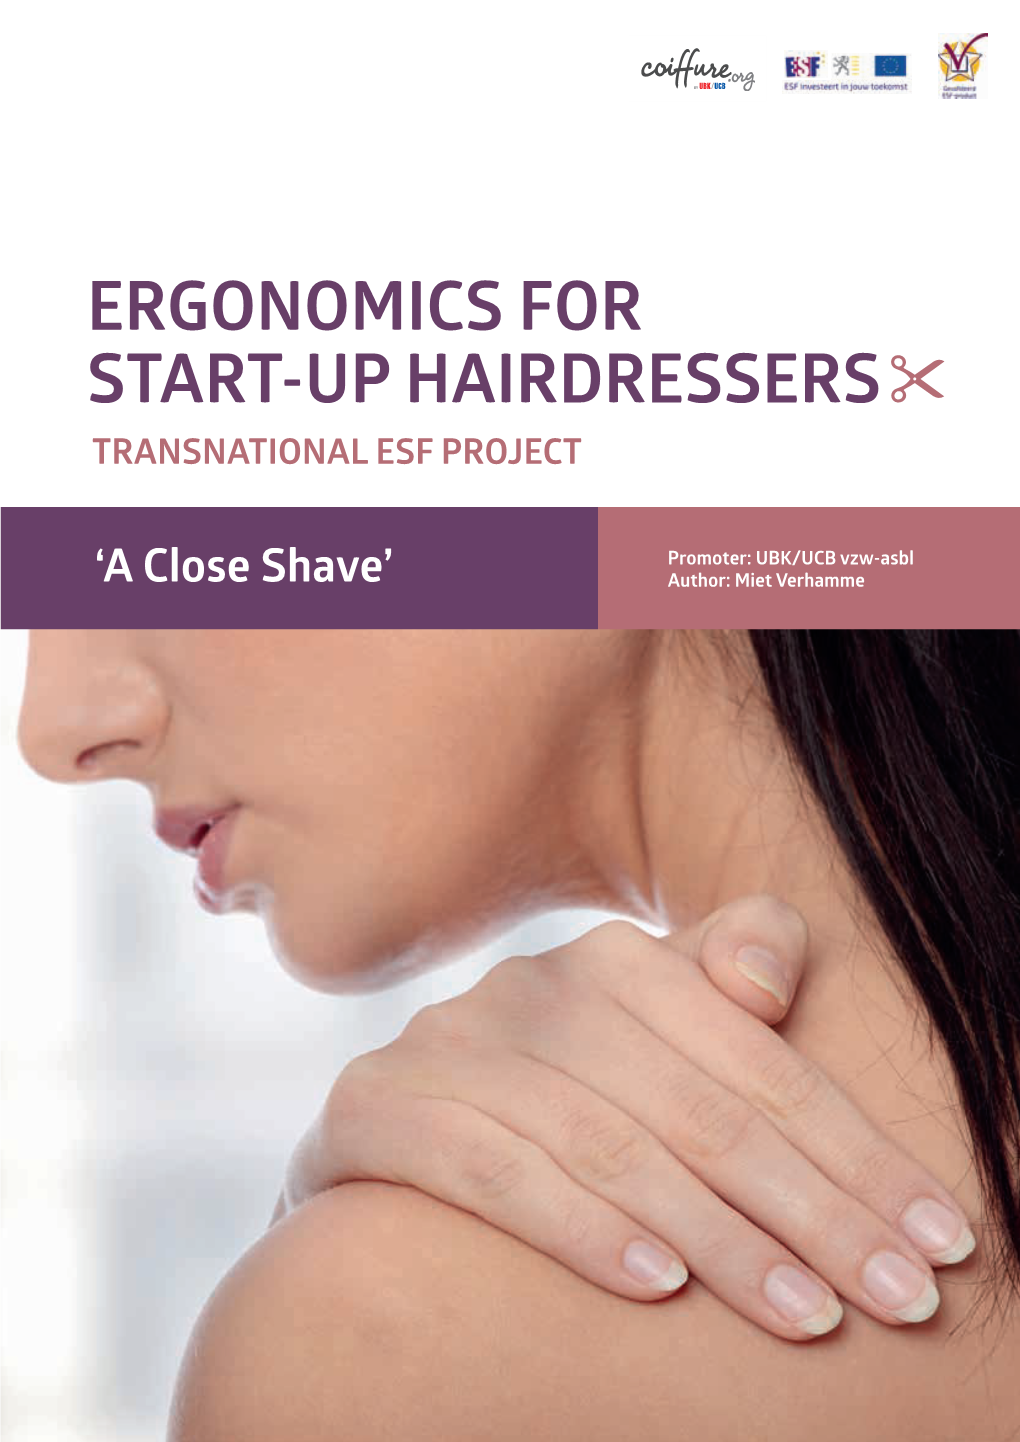 Ergonomics for Start-Up Hairdressers Transnational Esf Project